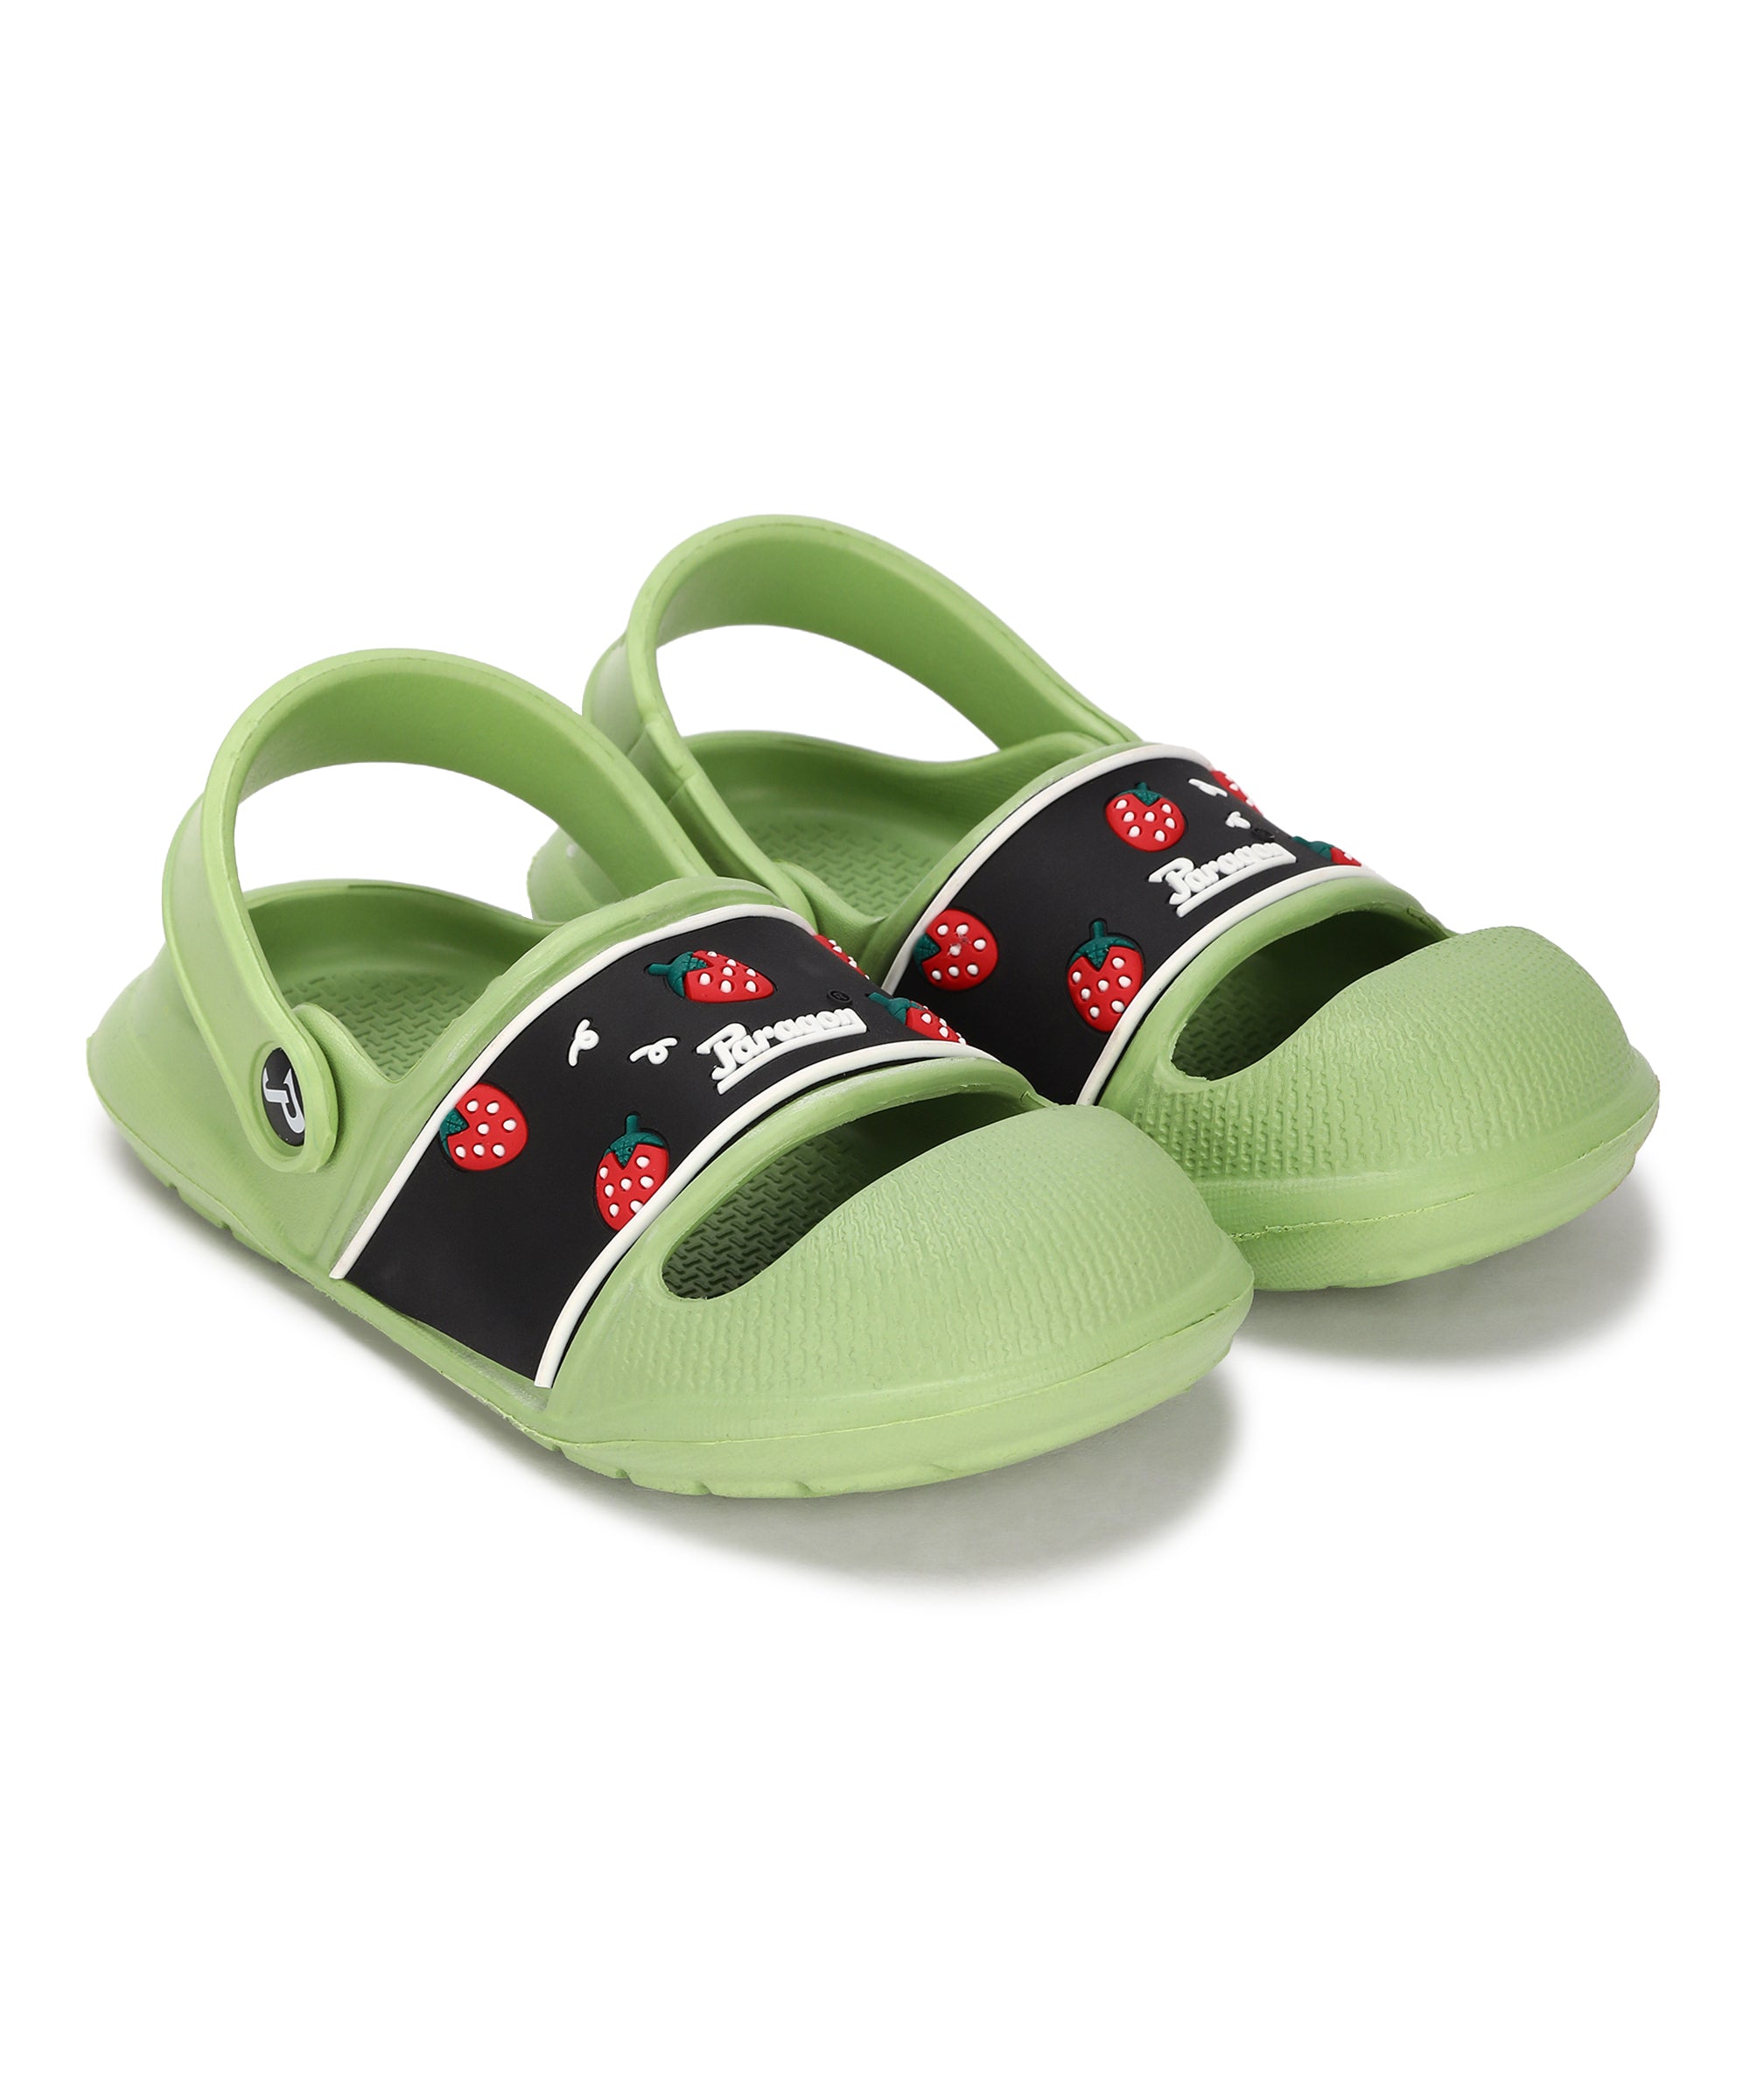 Paragon EVK8000C Kids Casual Fashion Clogs | Comfortable Trendy Outdoor Indoor Clogs for Boys &amp; Girls